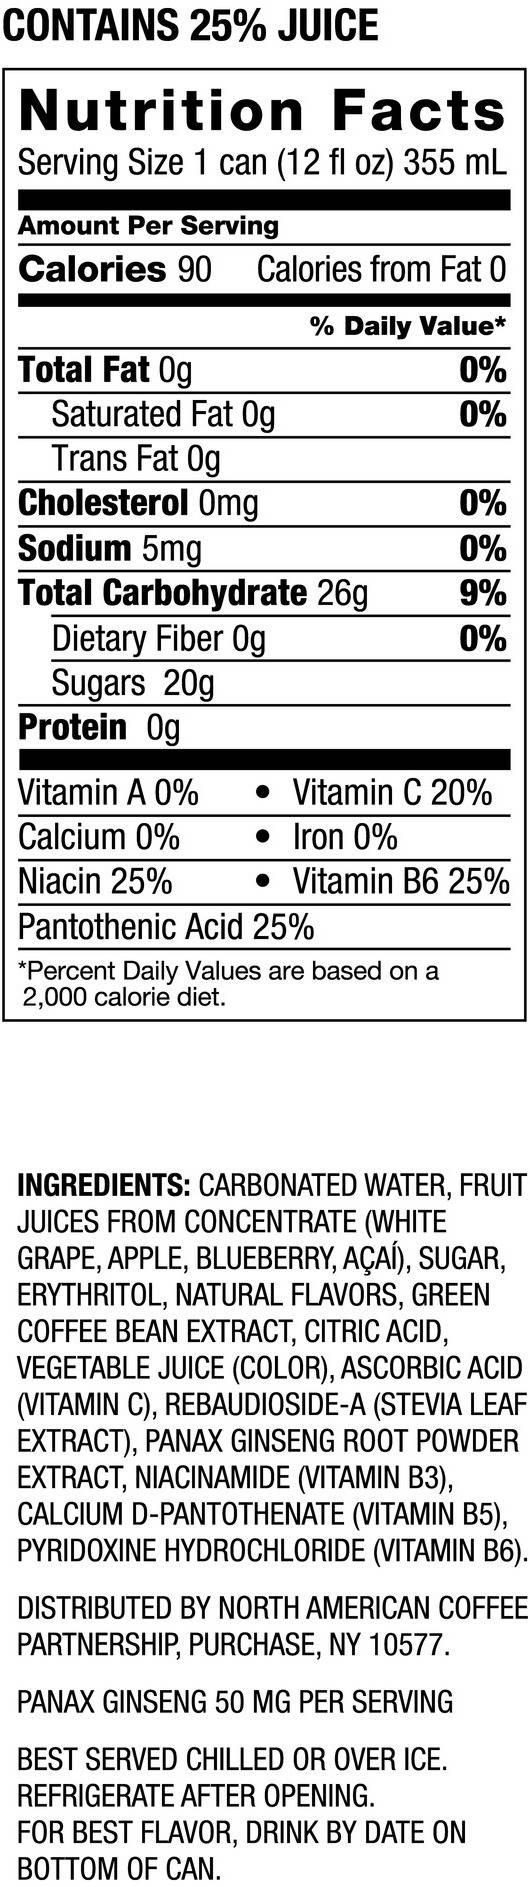 Image describing nutrition information for product Starbucks Refreshers Blueberry Acai